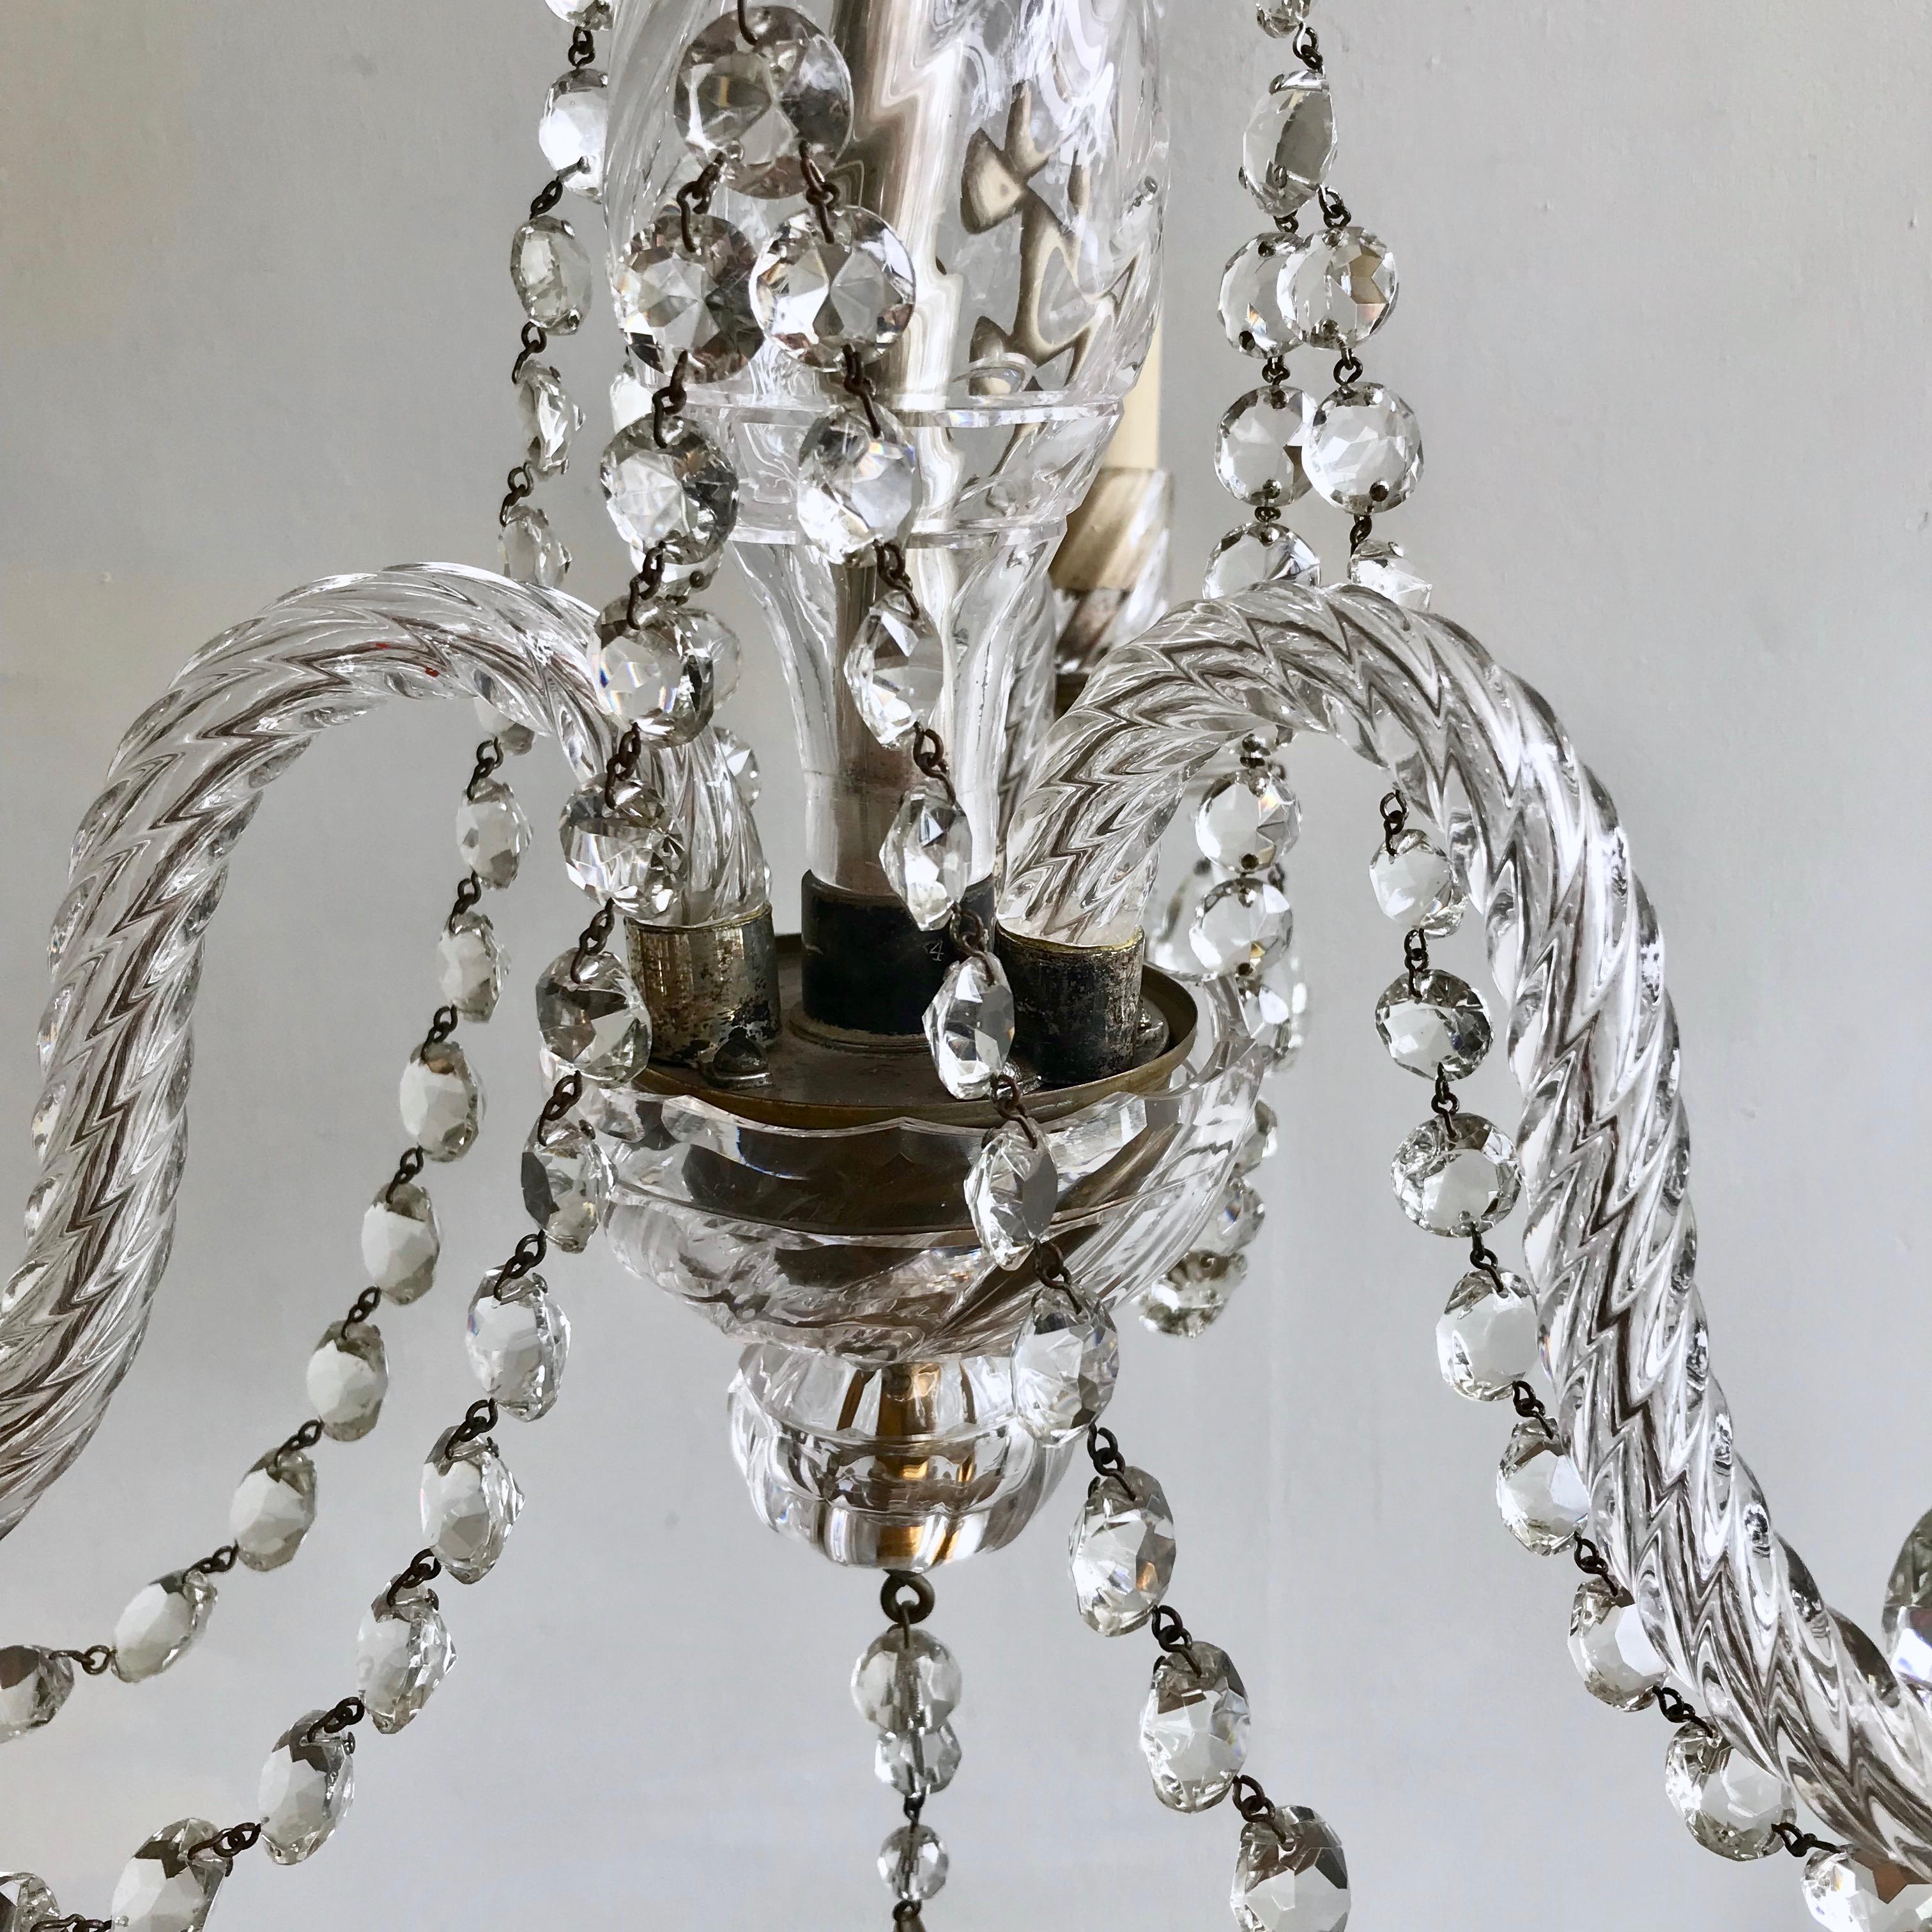 An English cut crystal chandelier originally a candelabra which has been electrified dates from the late 1800s. The chandelier has three arms each with an SES lamp holder. Each arm is connected with crystal swags which also connects to the upper